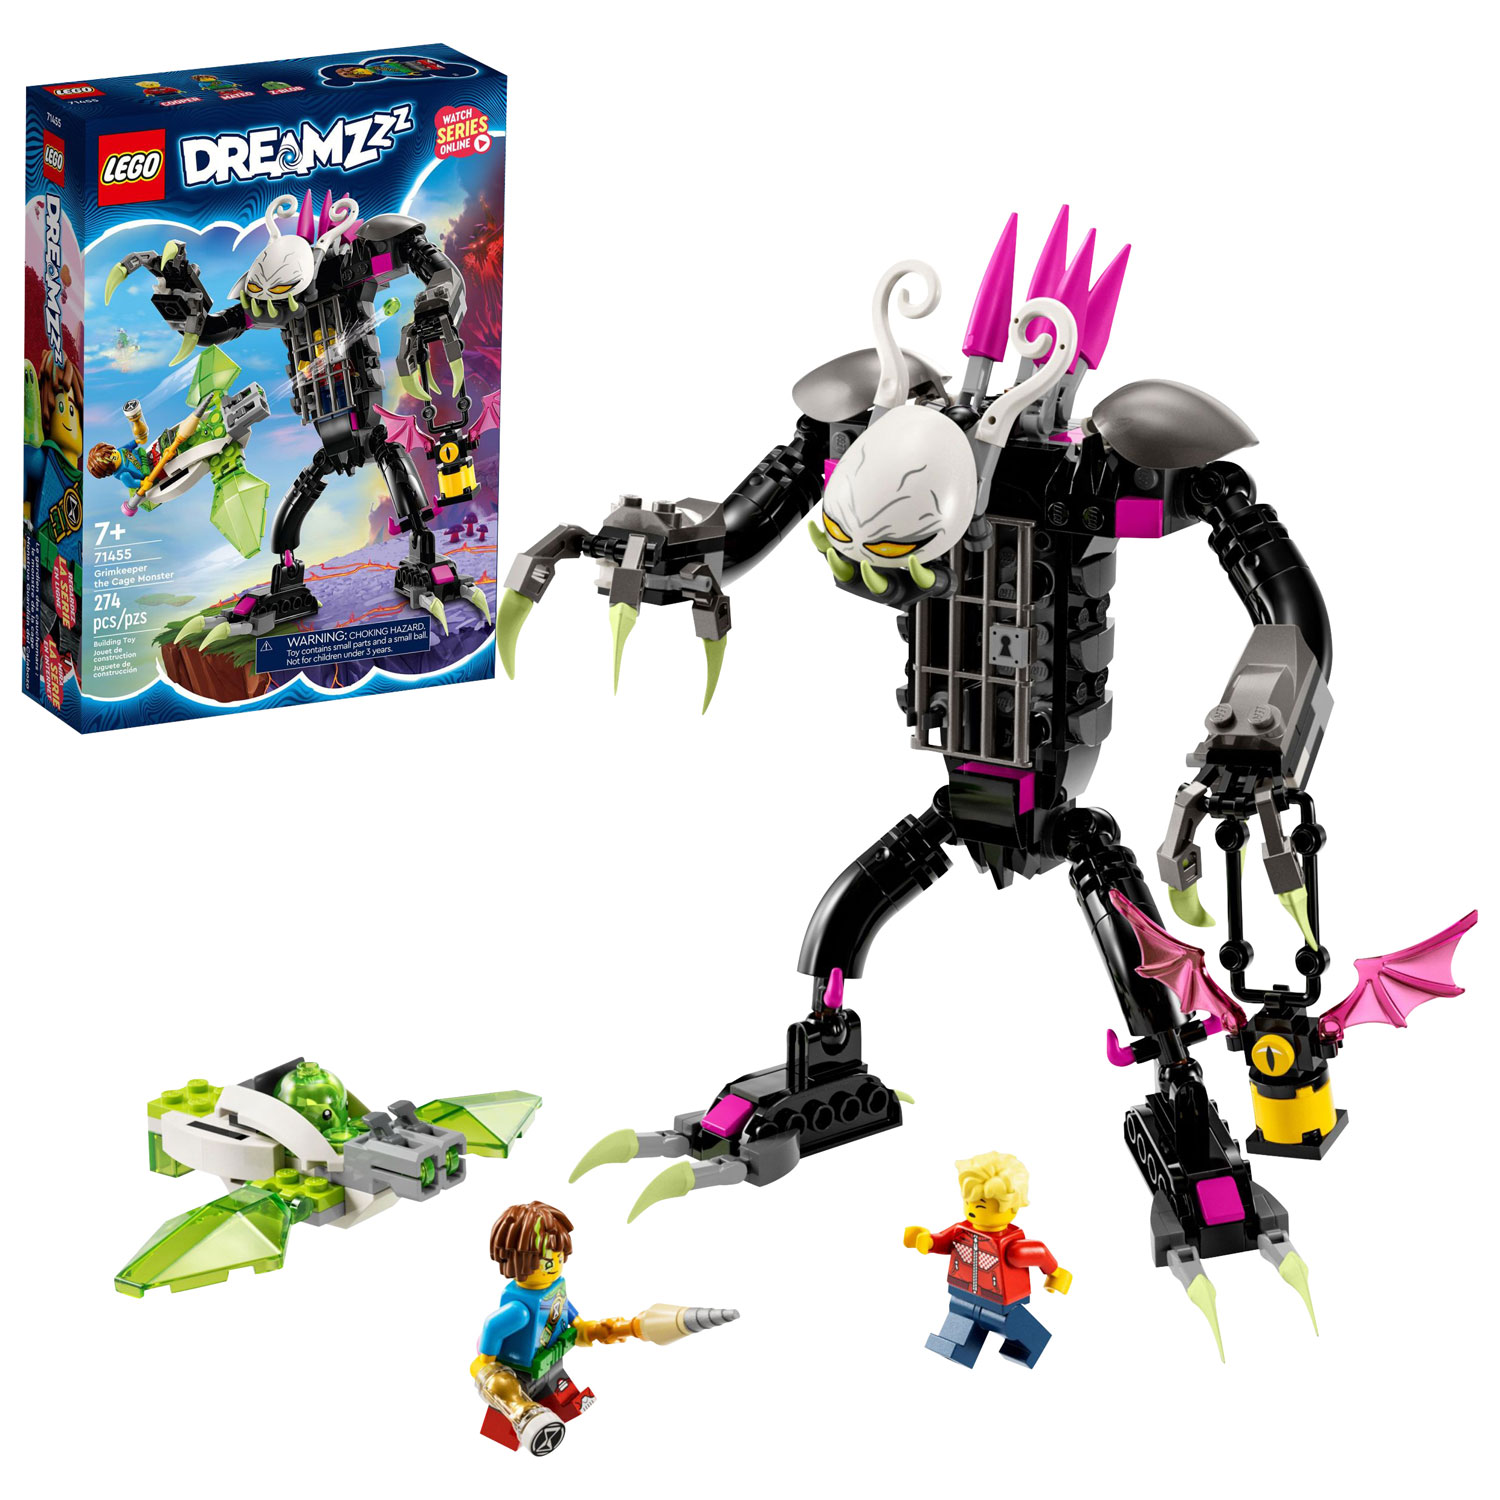 LEGO DREAMZzz: Grimkeeper the Cage Monster - 274 Pieces (71455)